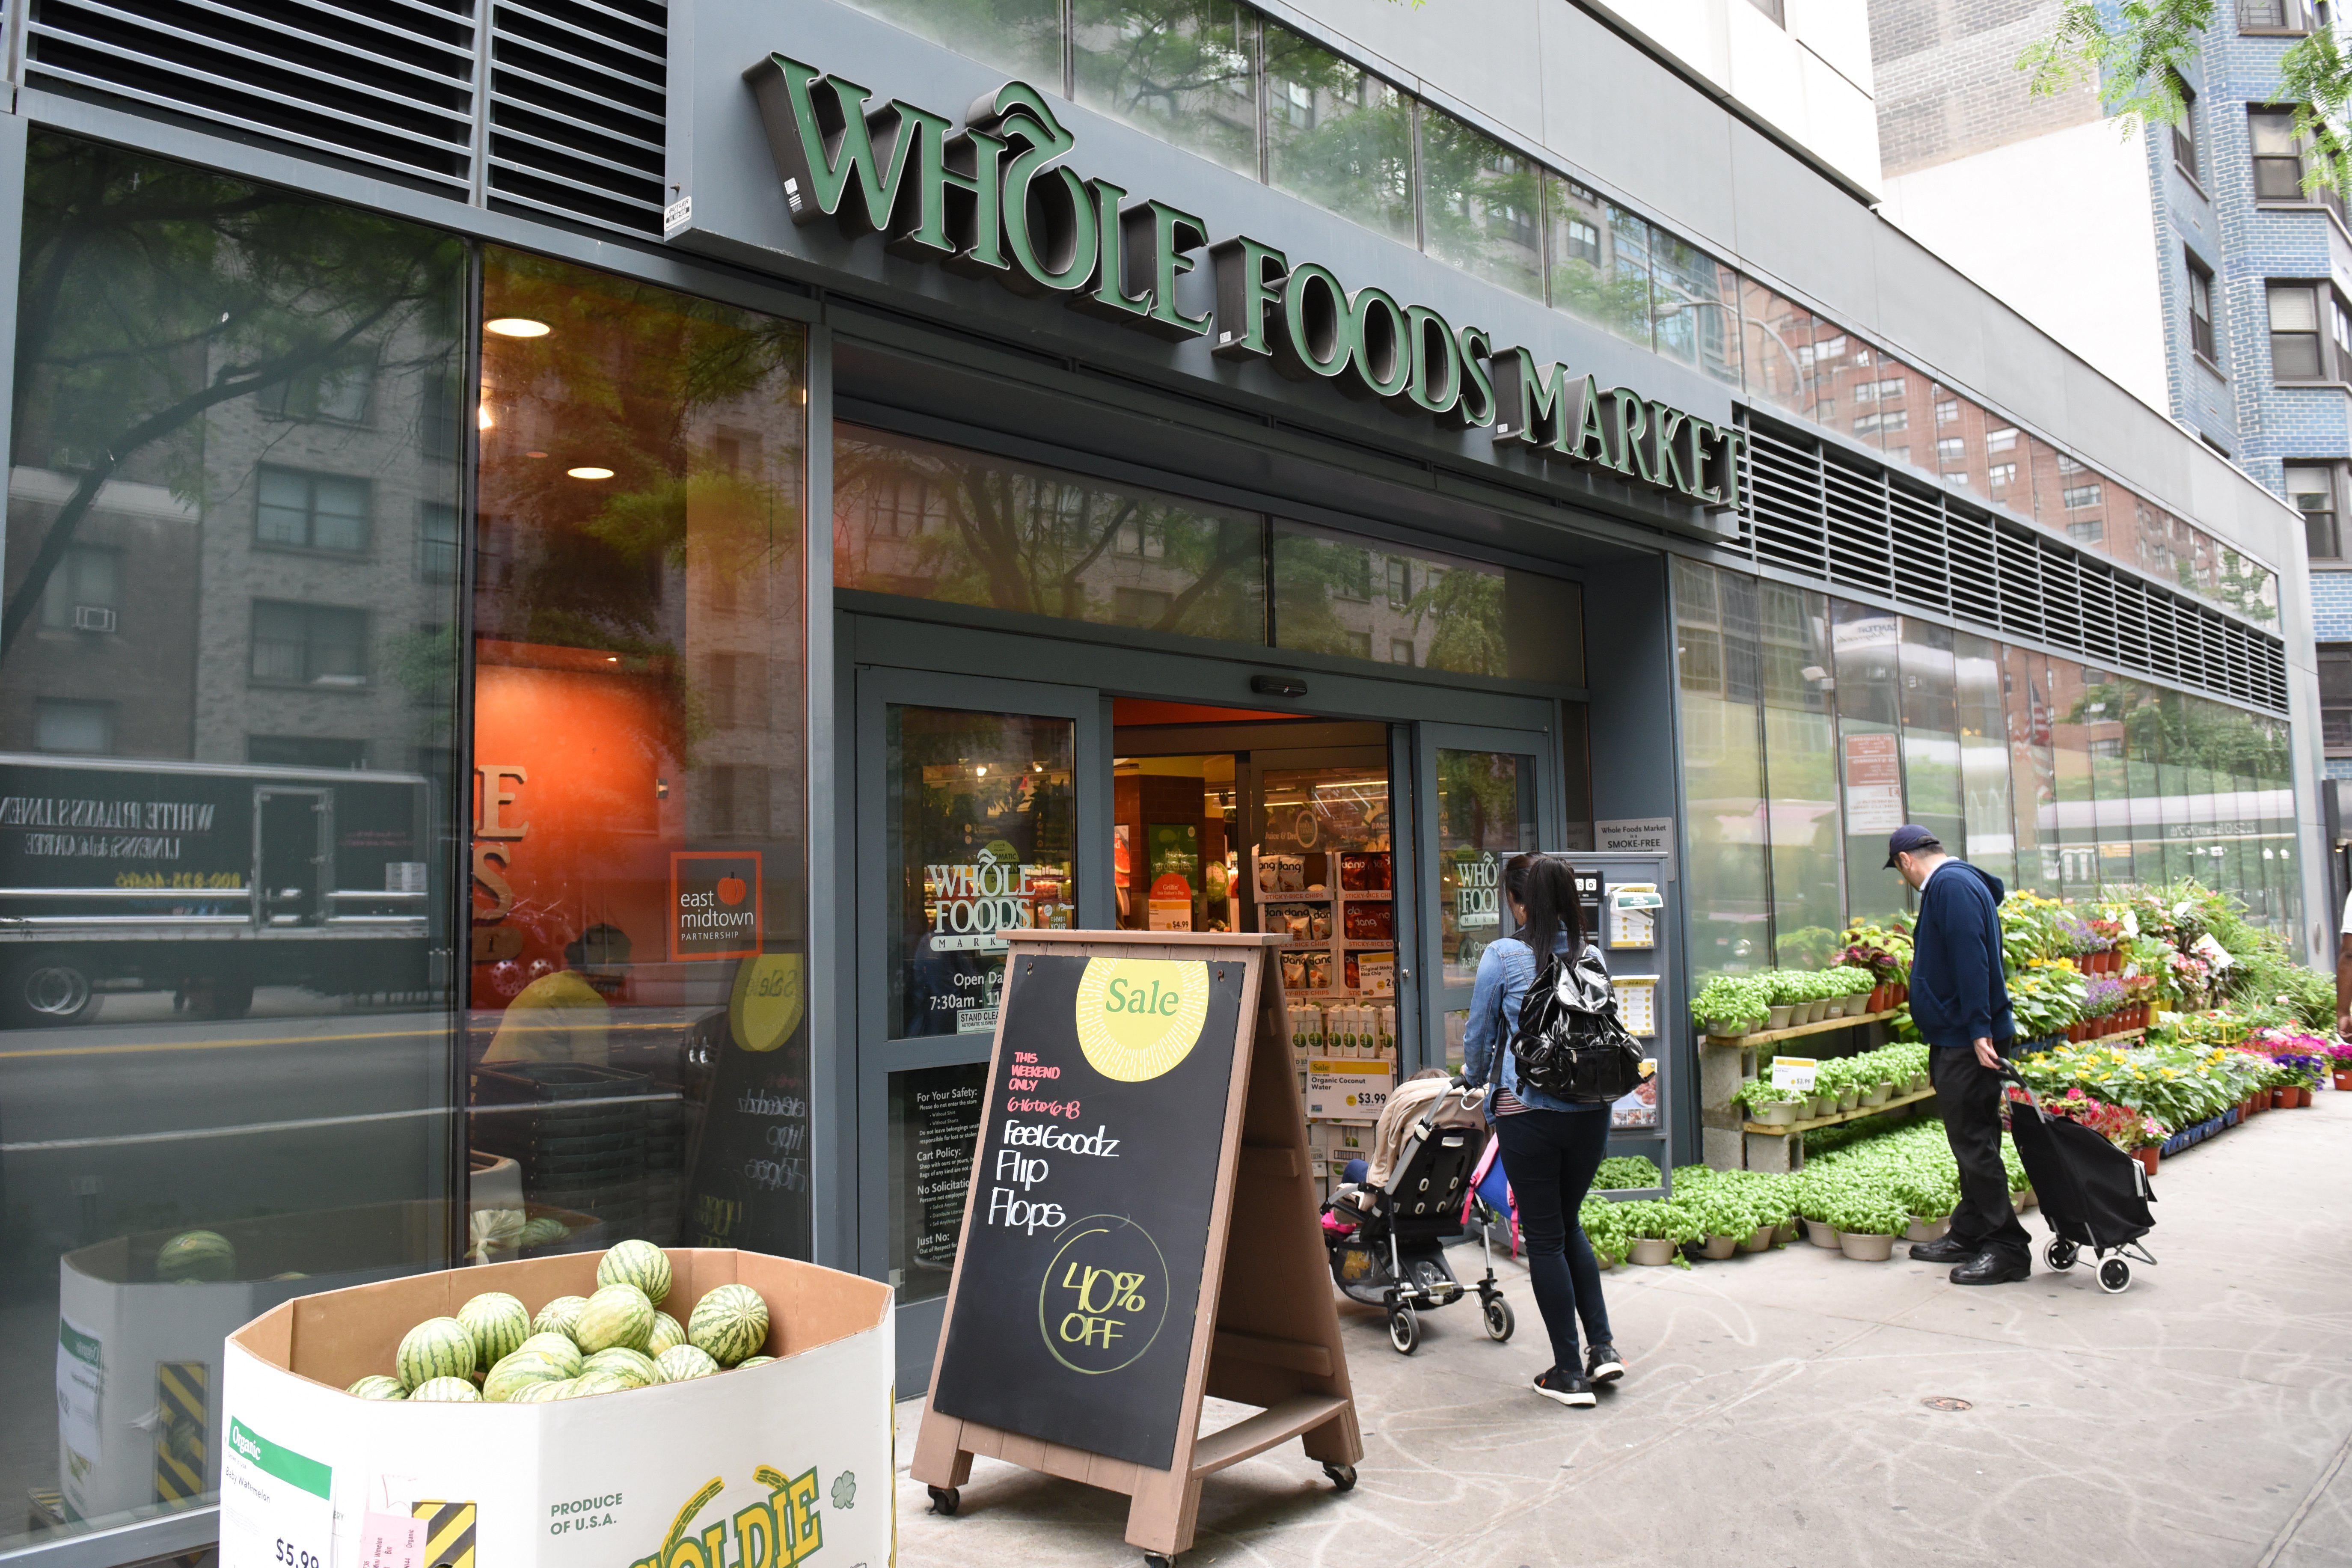 The exterior of the Whole Foods Market in Midtown New York City on June 16, 2017.